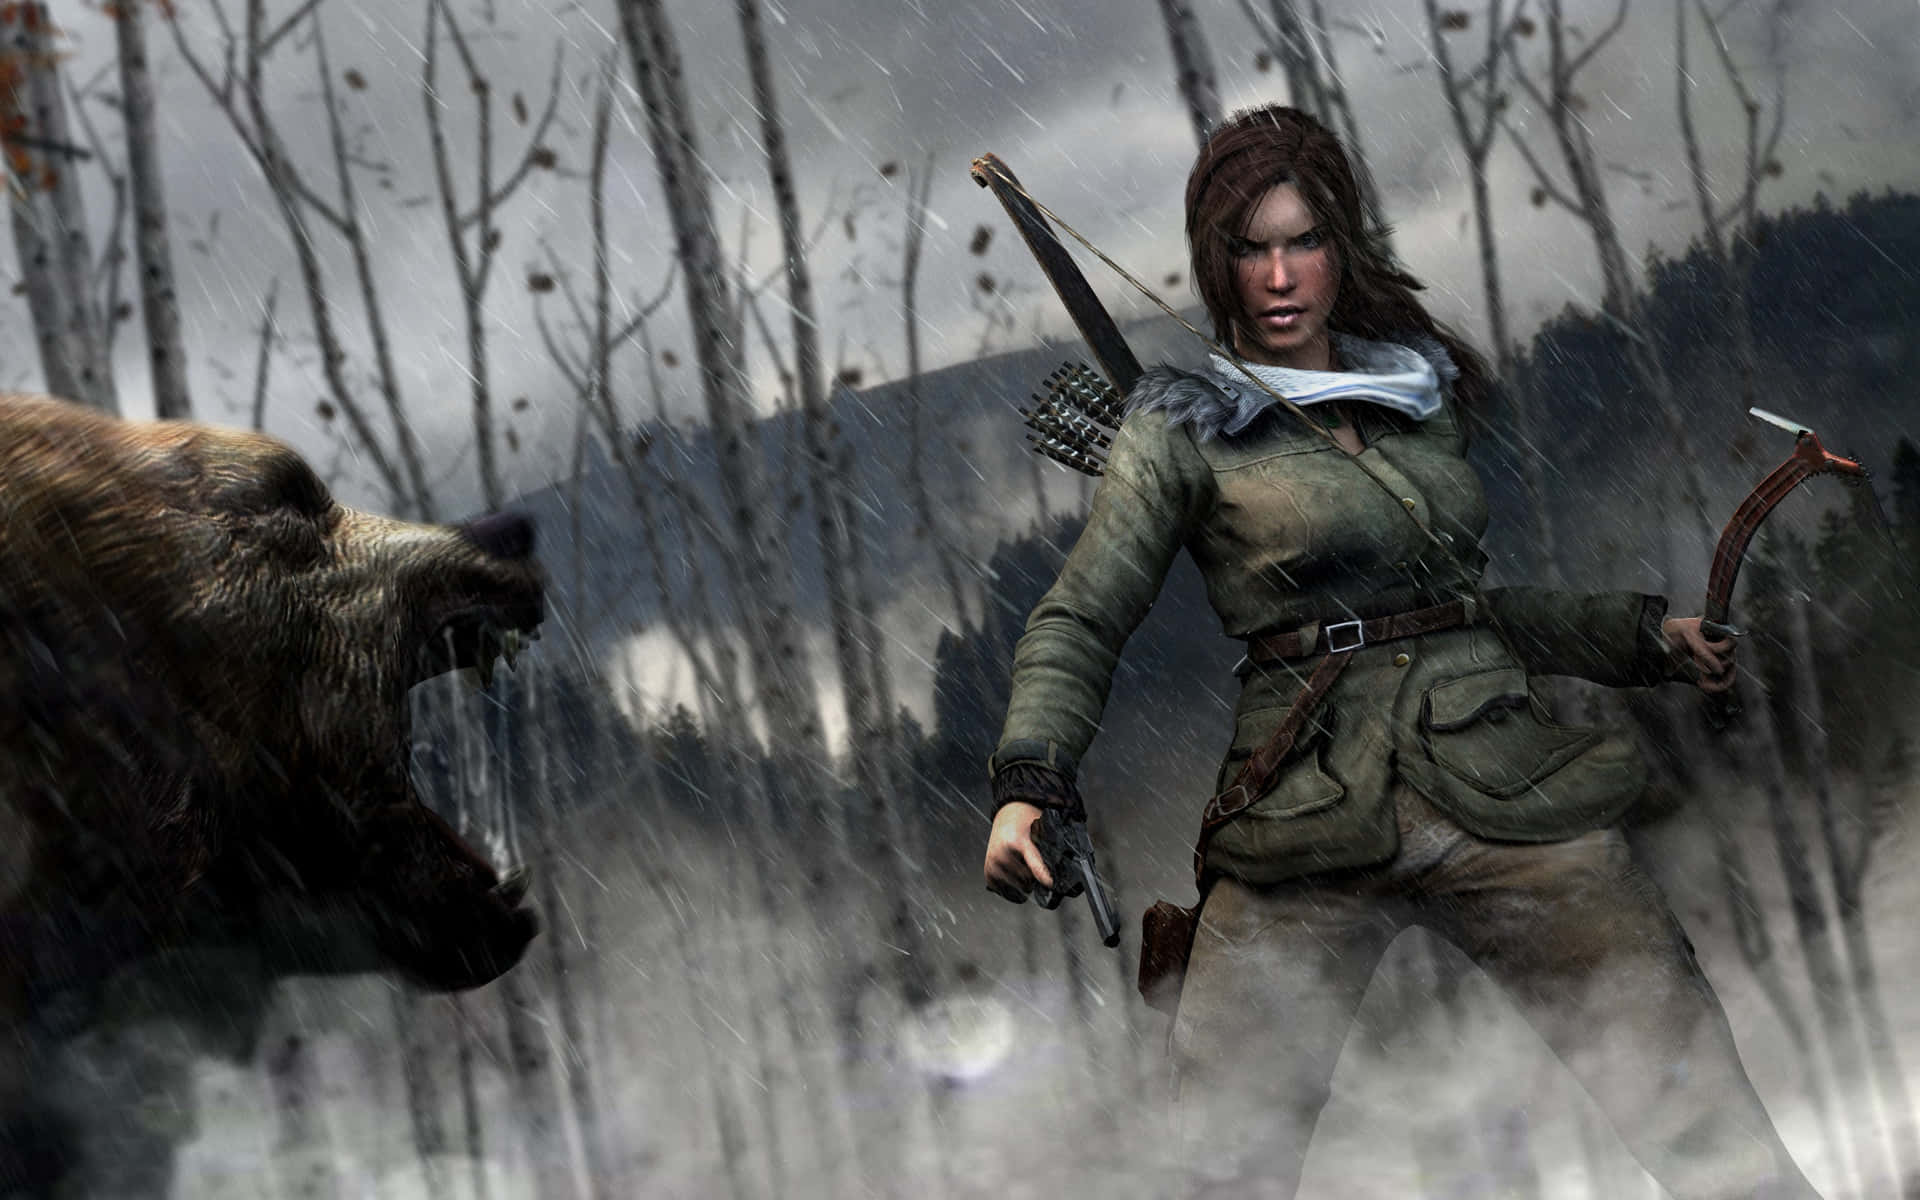 A Woman With A Bow And Arrow In The Woods